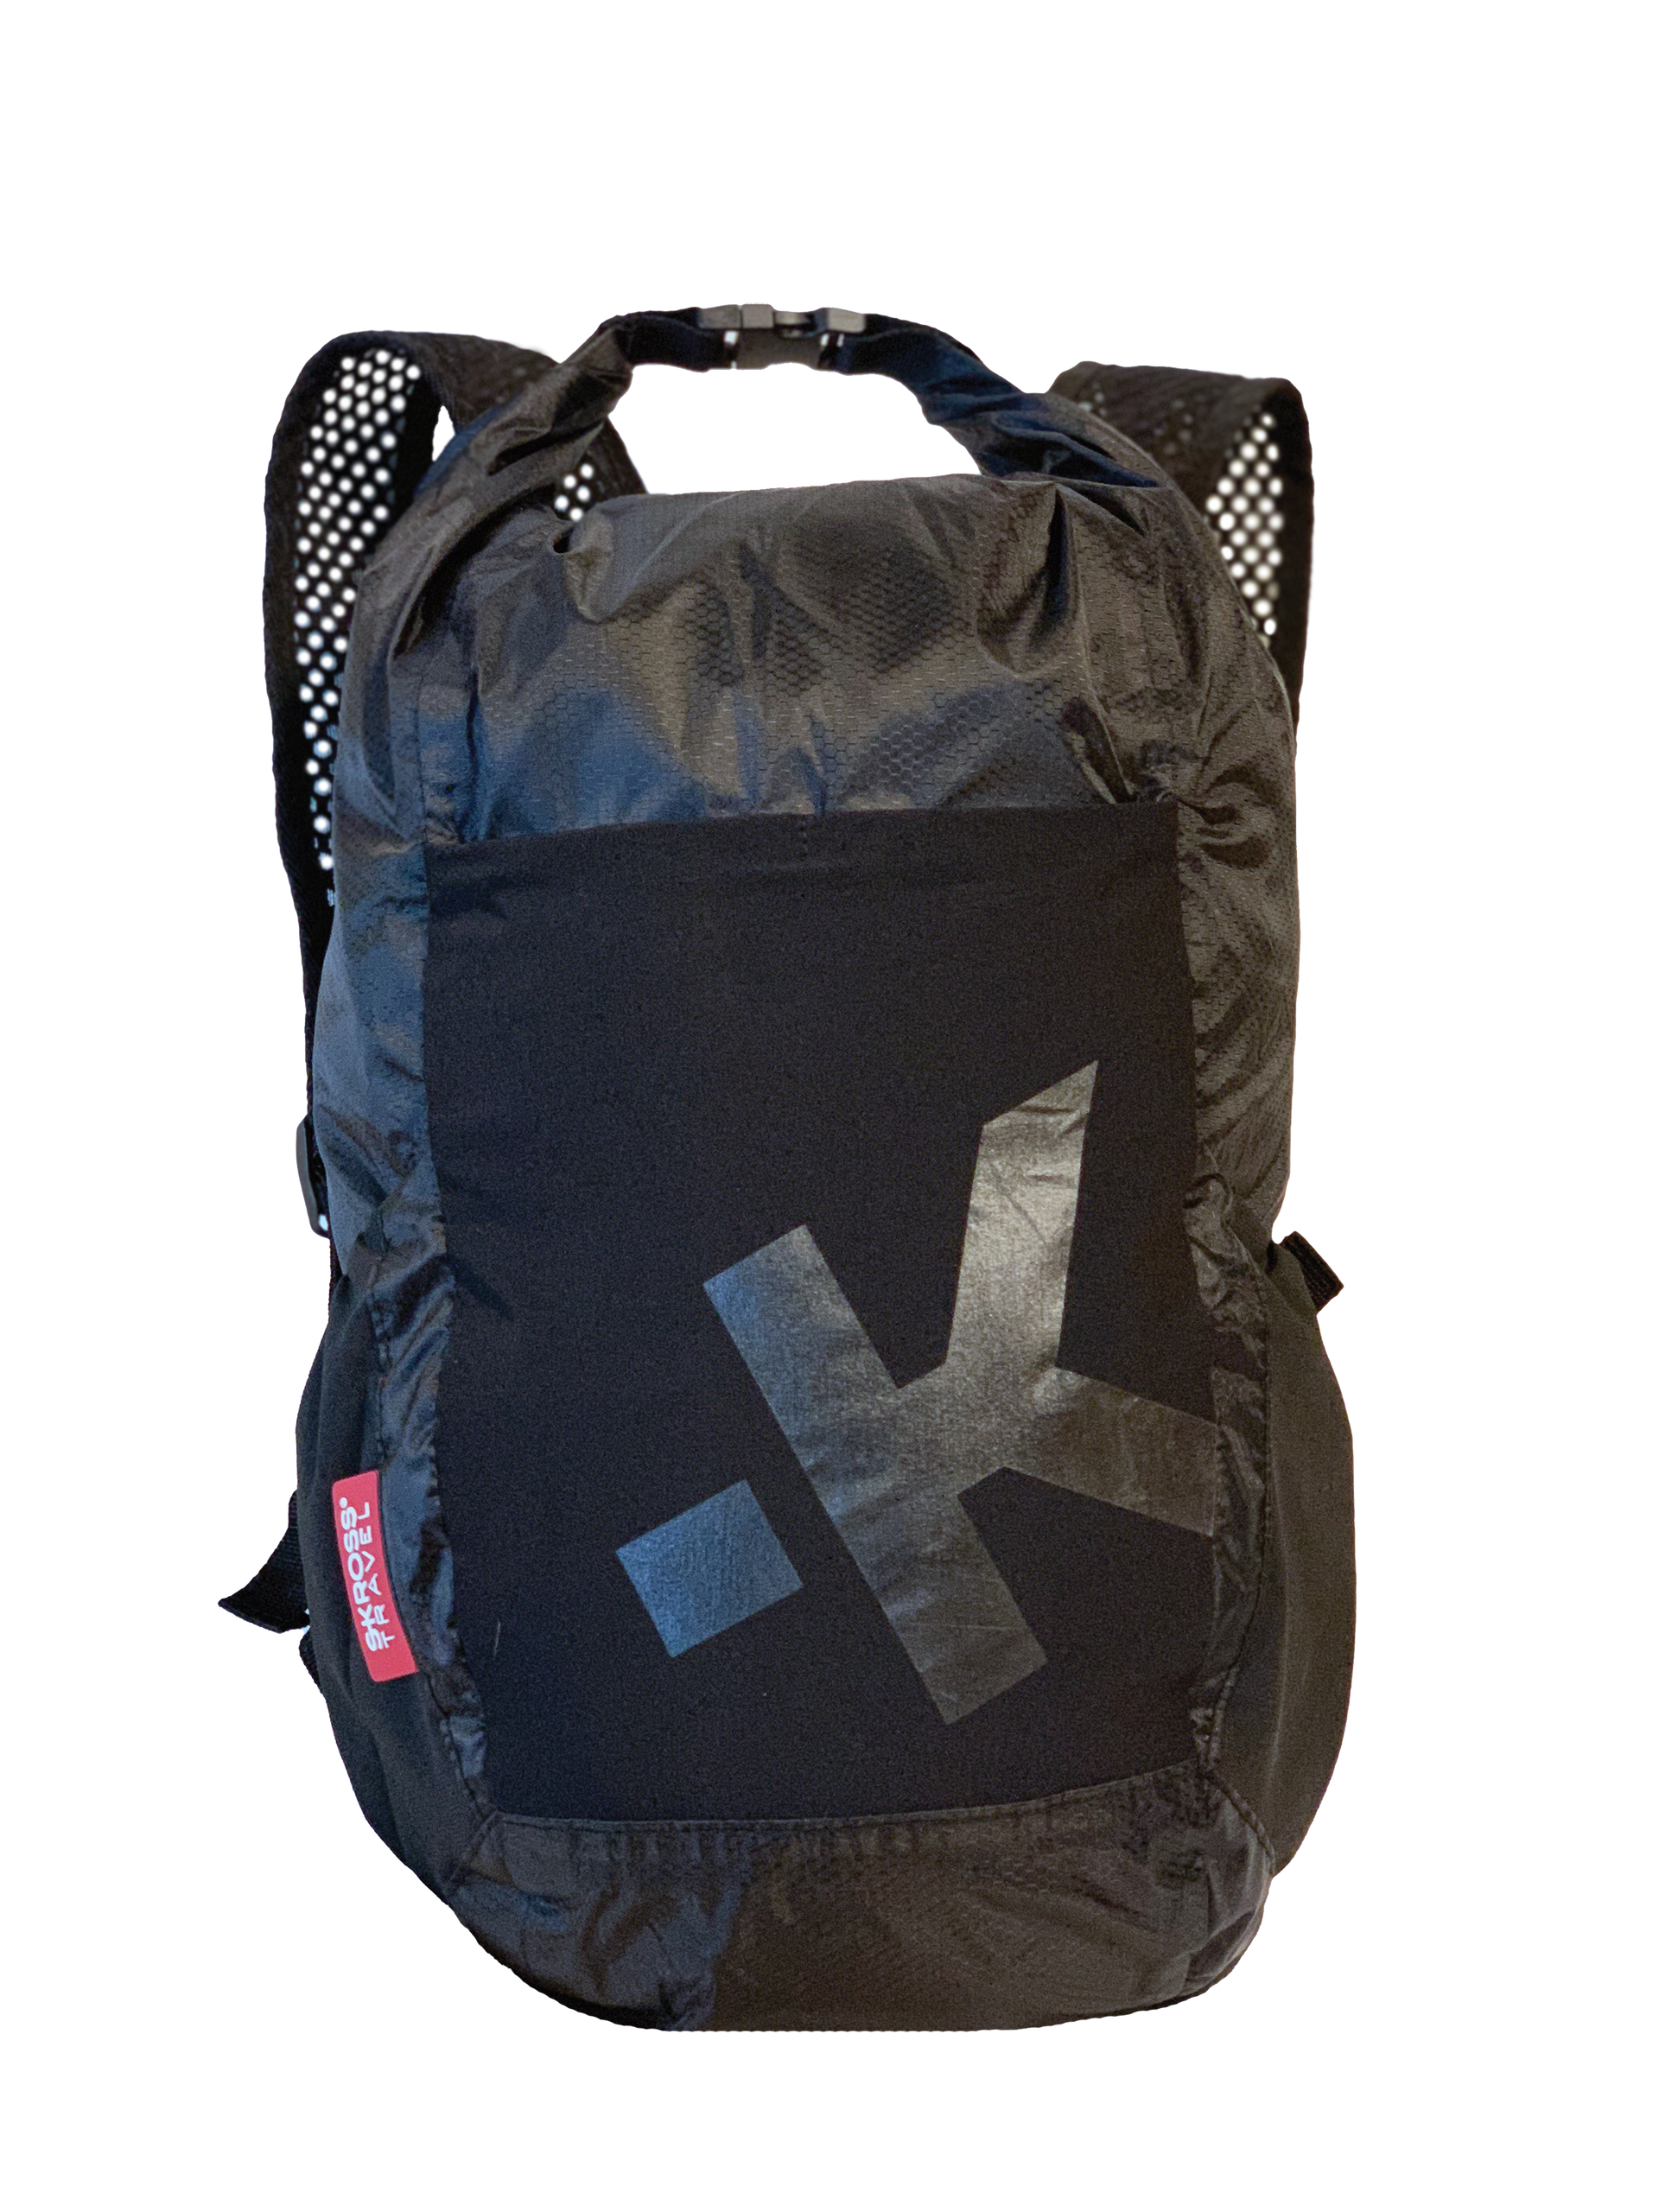 A black Skross backpack with the letter K on it